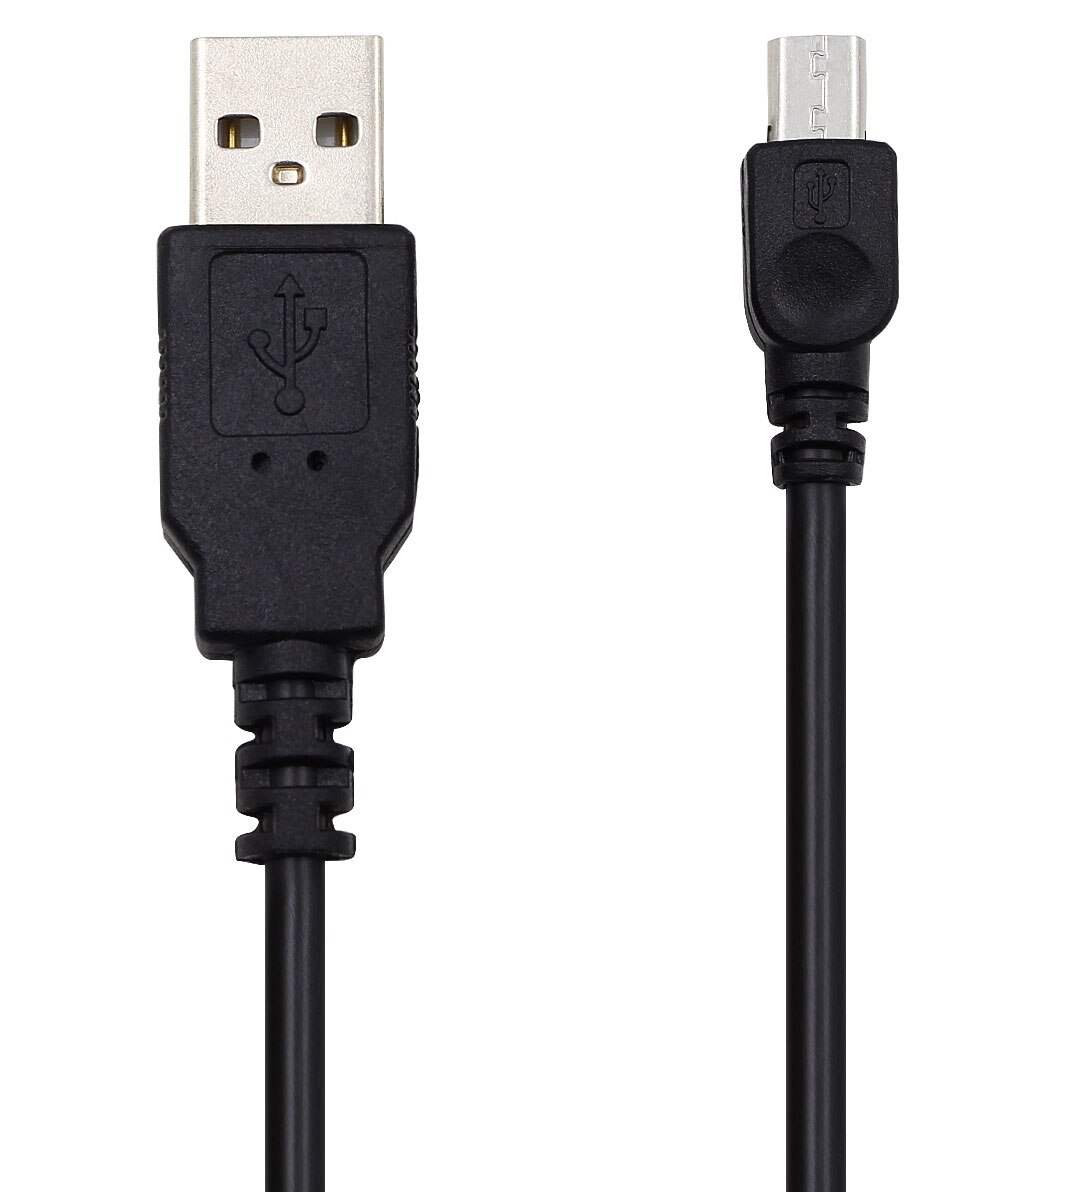 Usb Power Charger Data Cable Koord Voor Golfbuddy Voice + V3 VS4 Gps